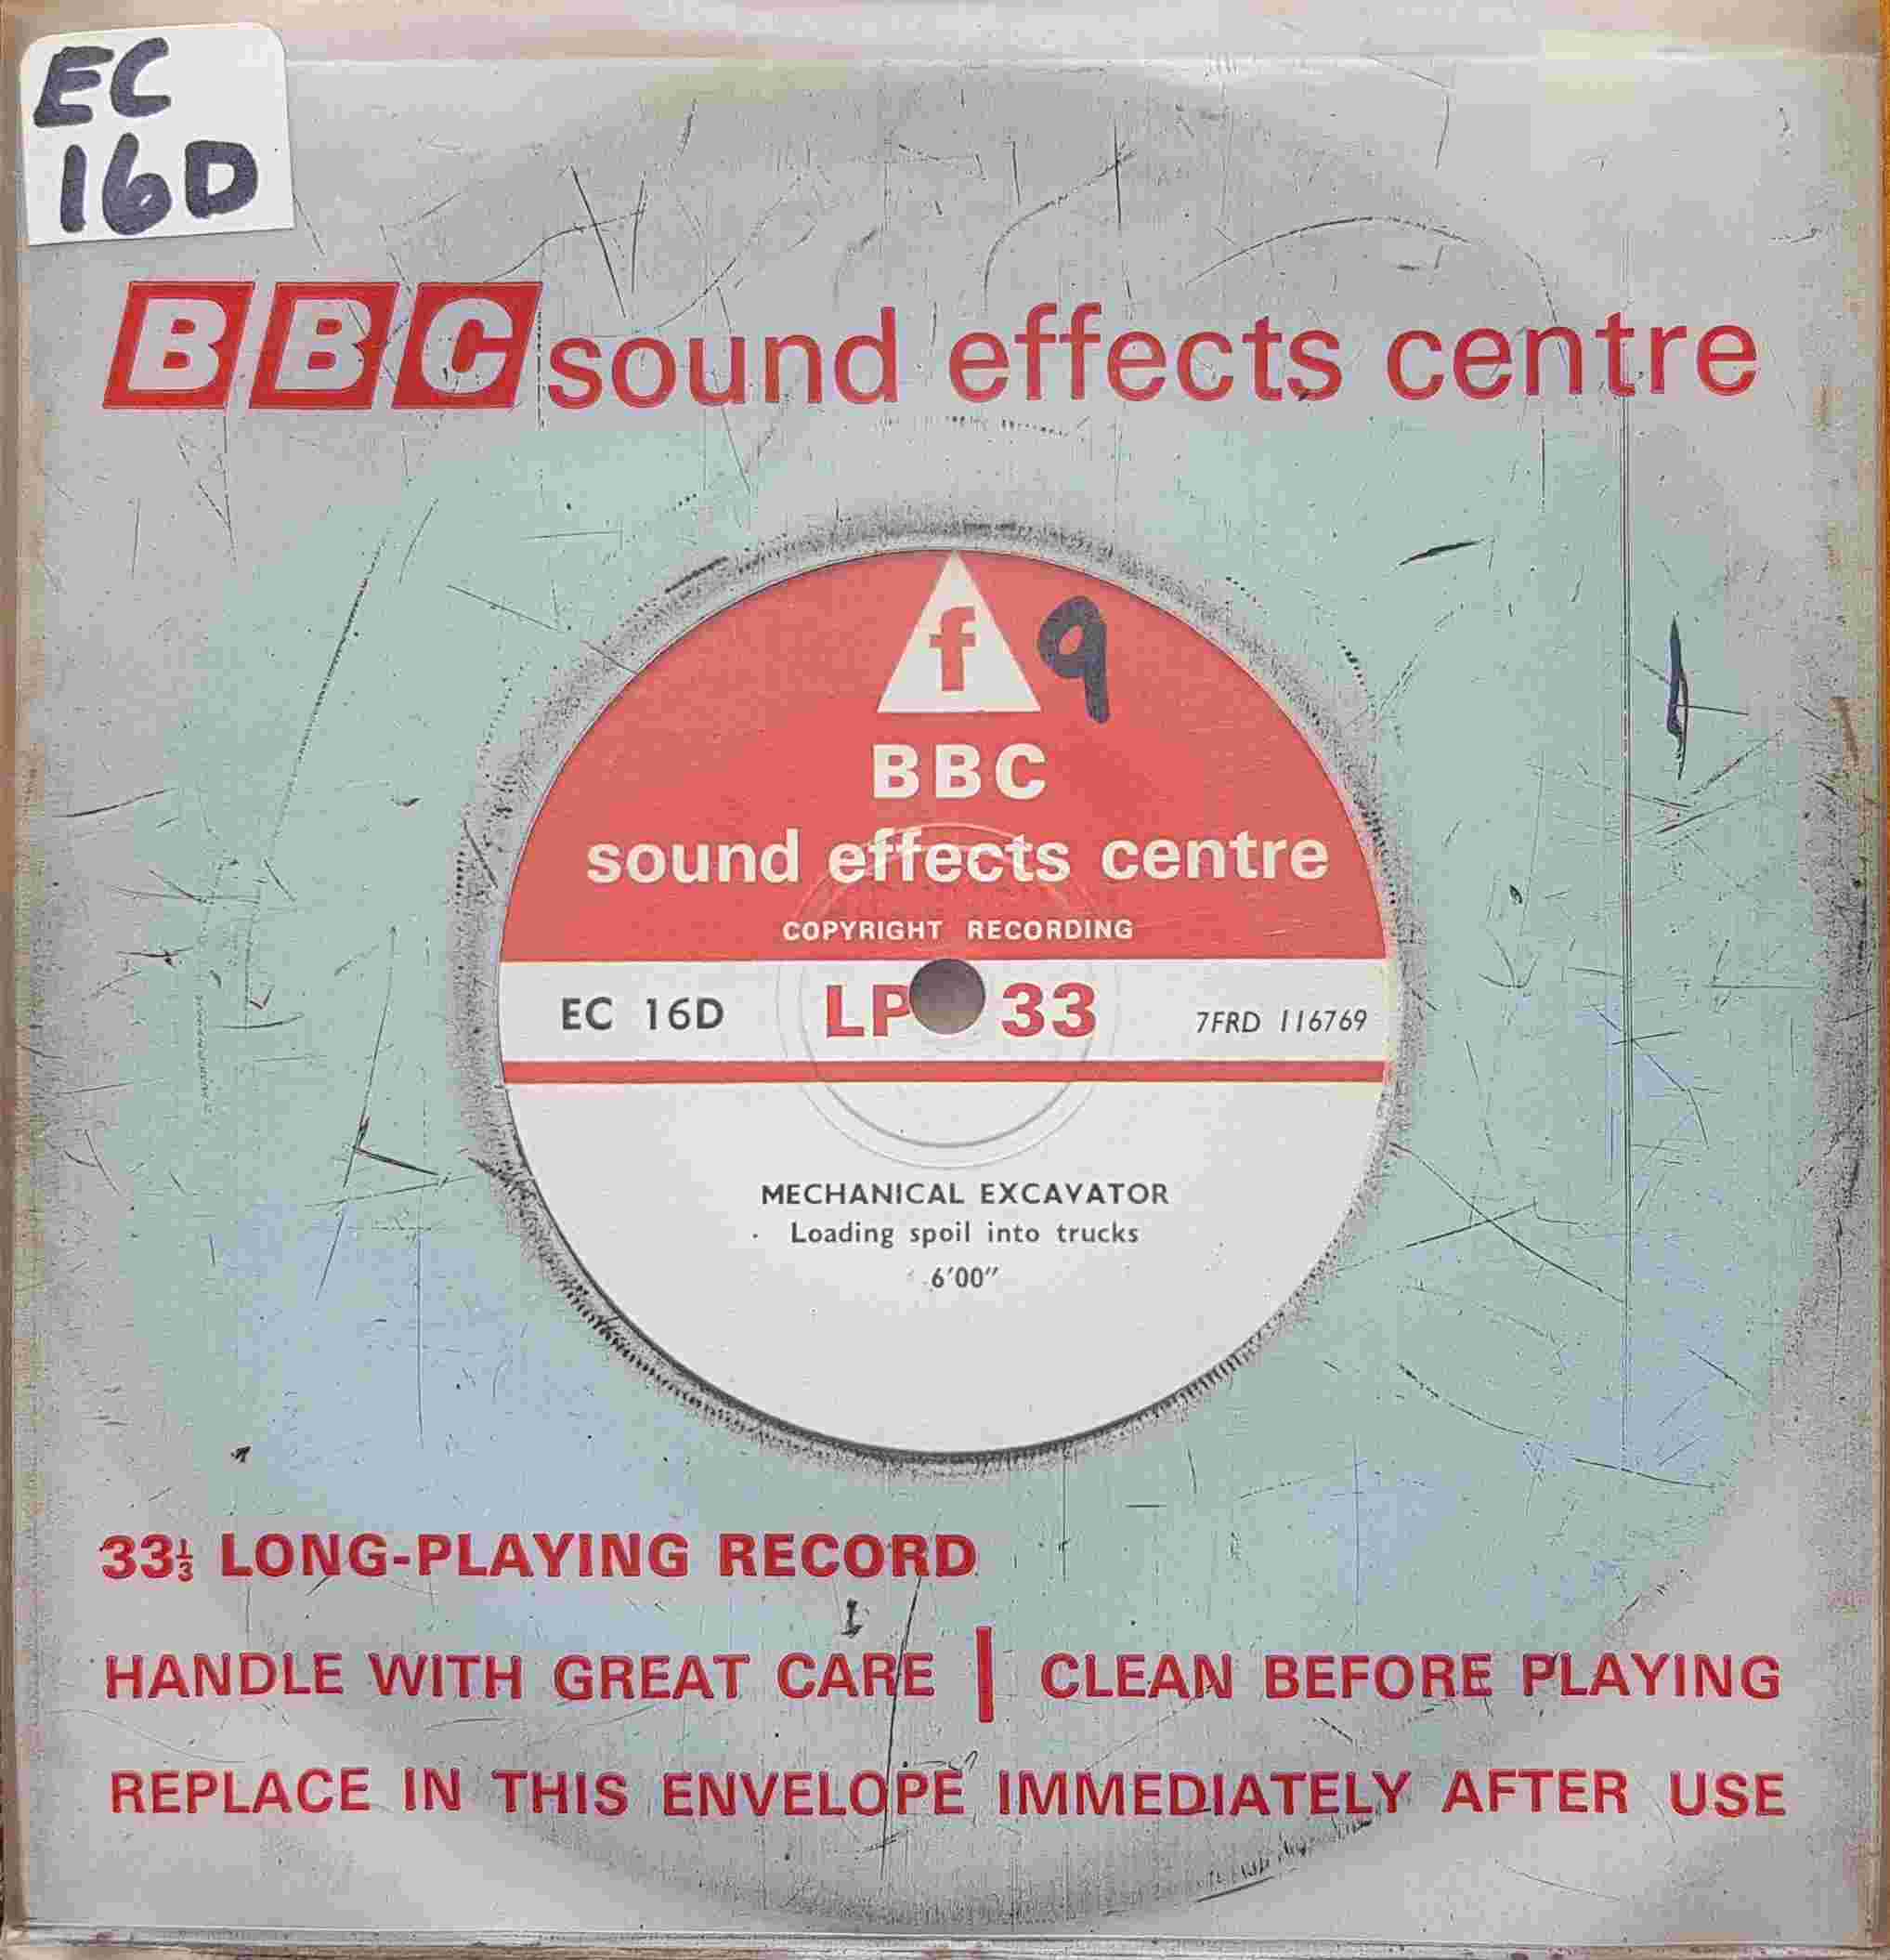 Picture of EC 16D Mechanical excavator / Pneumatic drills by artist Not registered from the BBC singles - Records and Tapes library